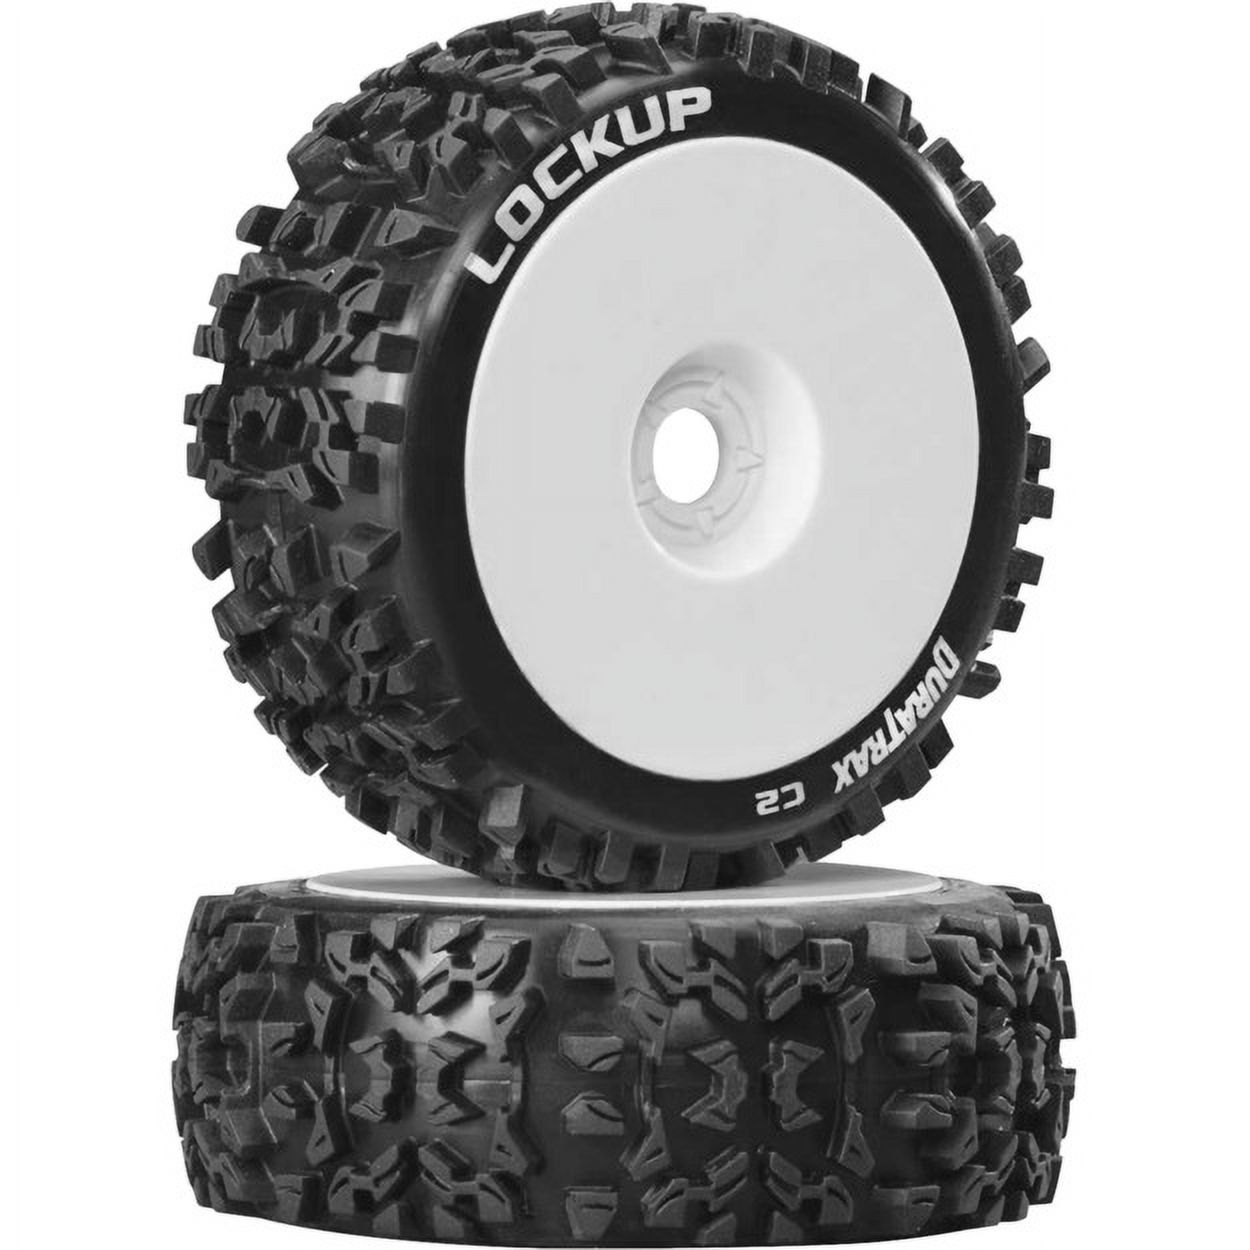 Duratrax 1/8 Lockup Buggy Tire C2 Mounted White 2 DTXC3615 RC Tire - image 2 of 2